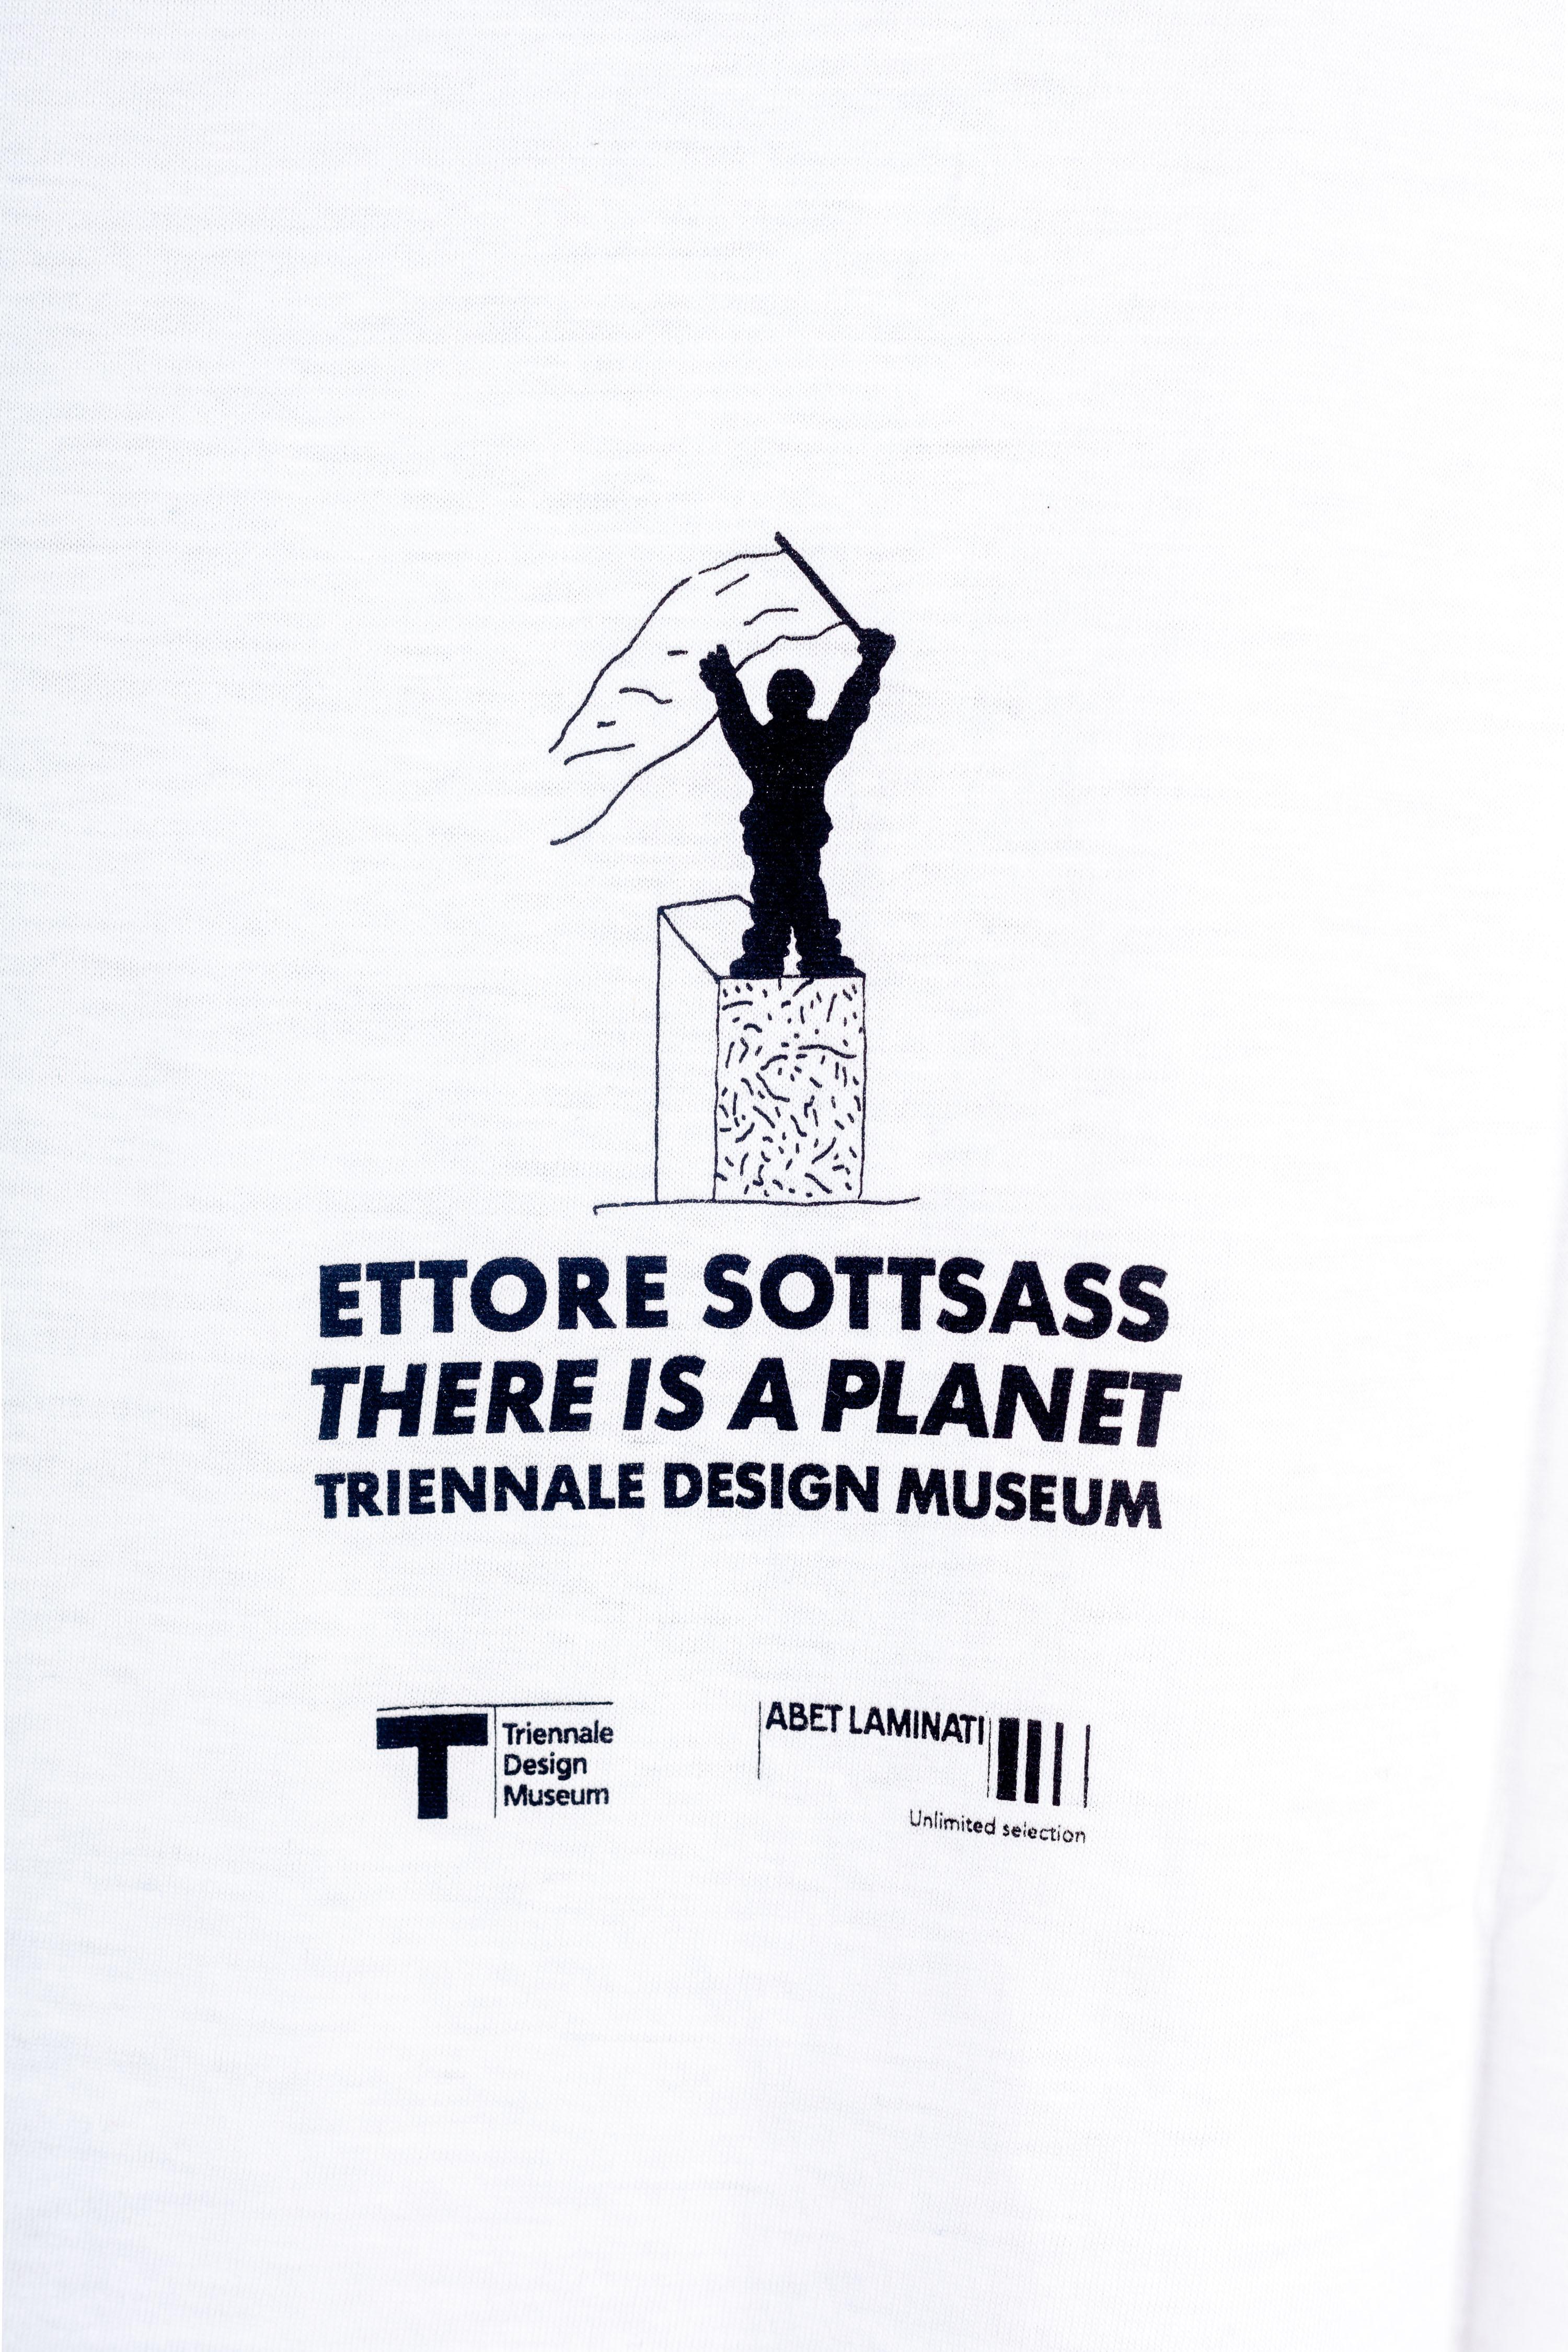 Fabric Ettore Sottsass Bacterio Shirt, 2017 Triennale Design Museum Exhibition, New For Sale